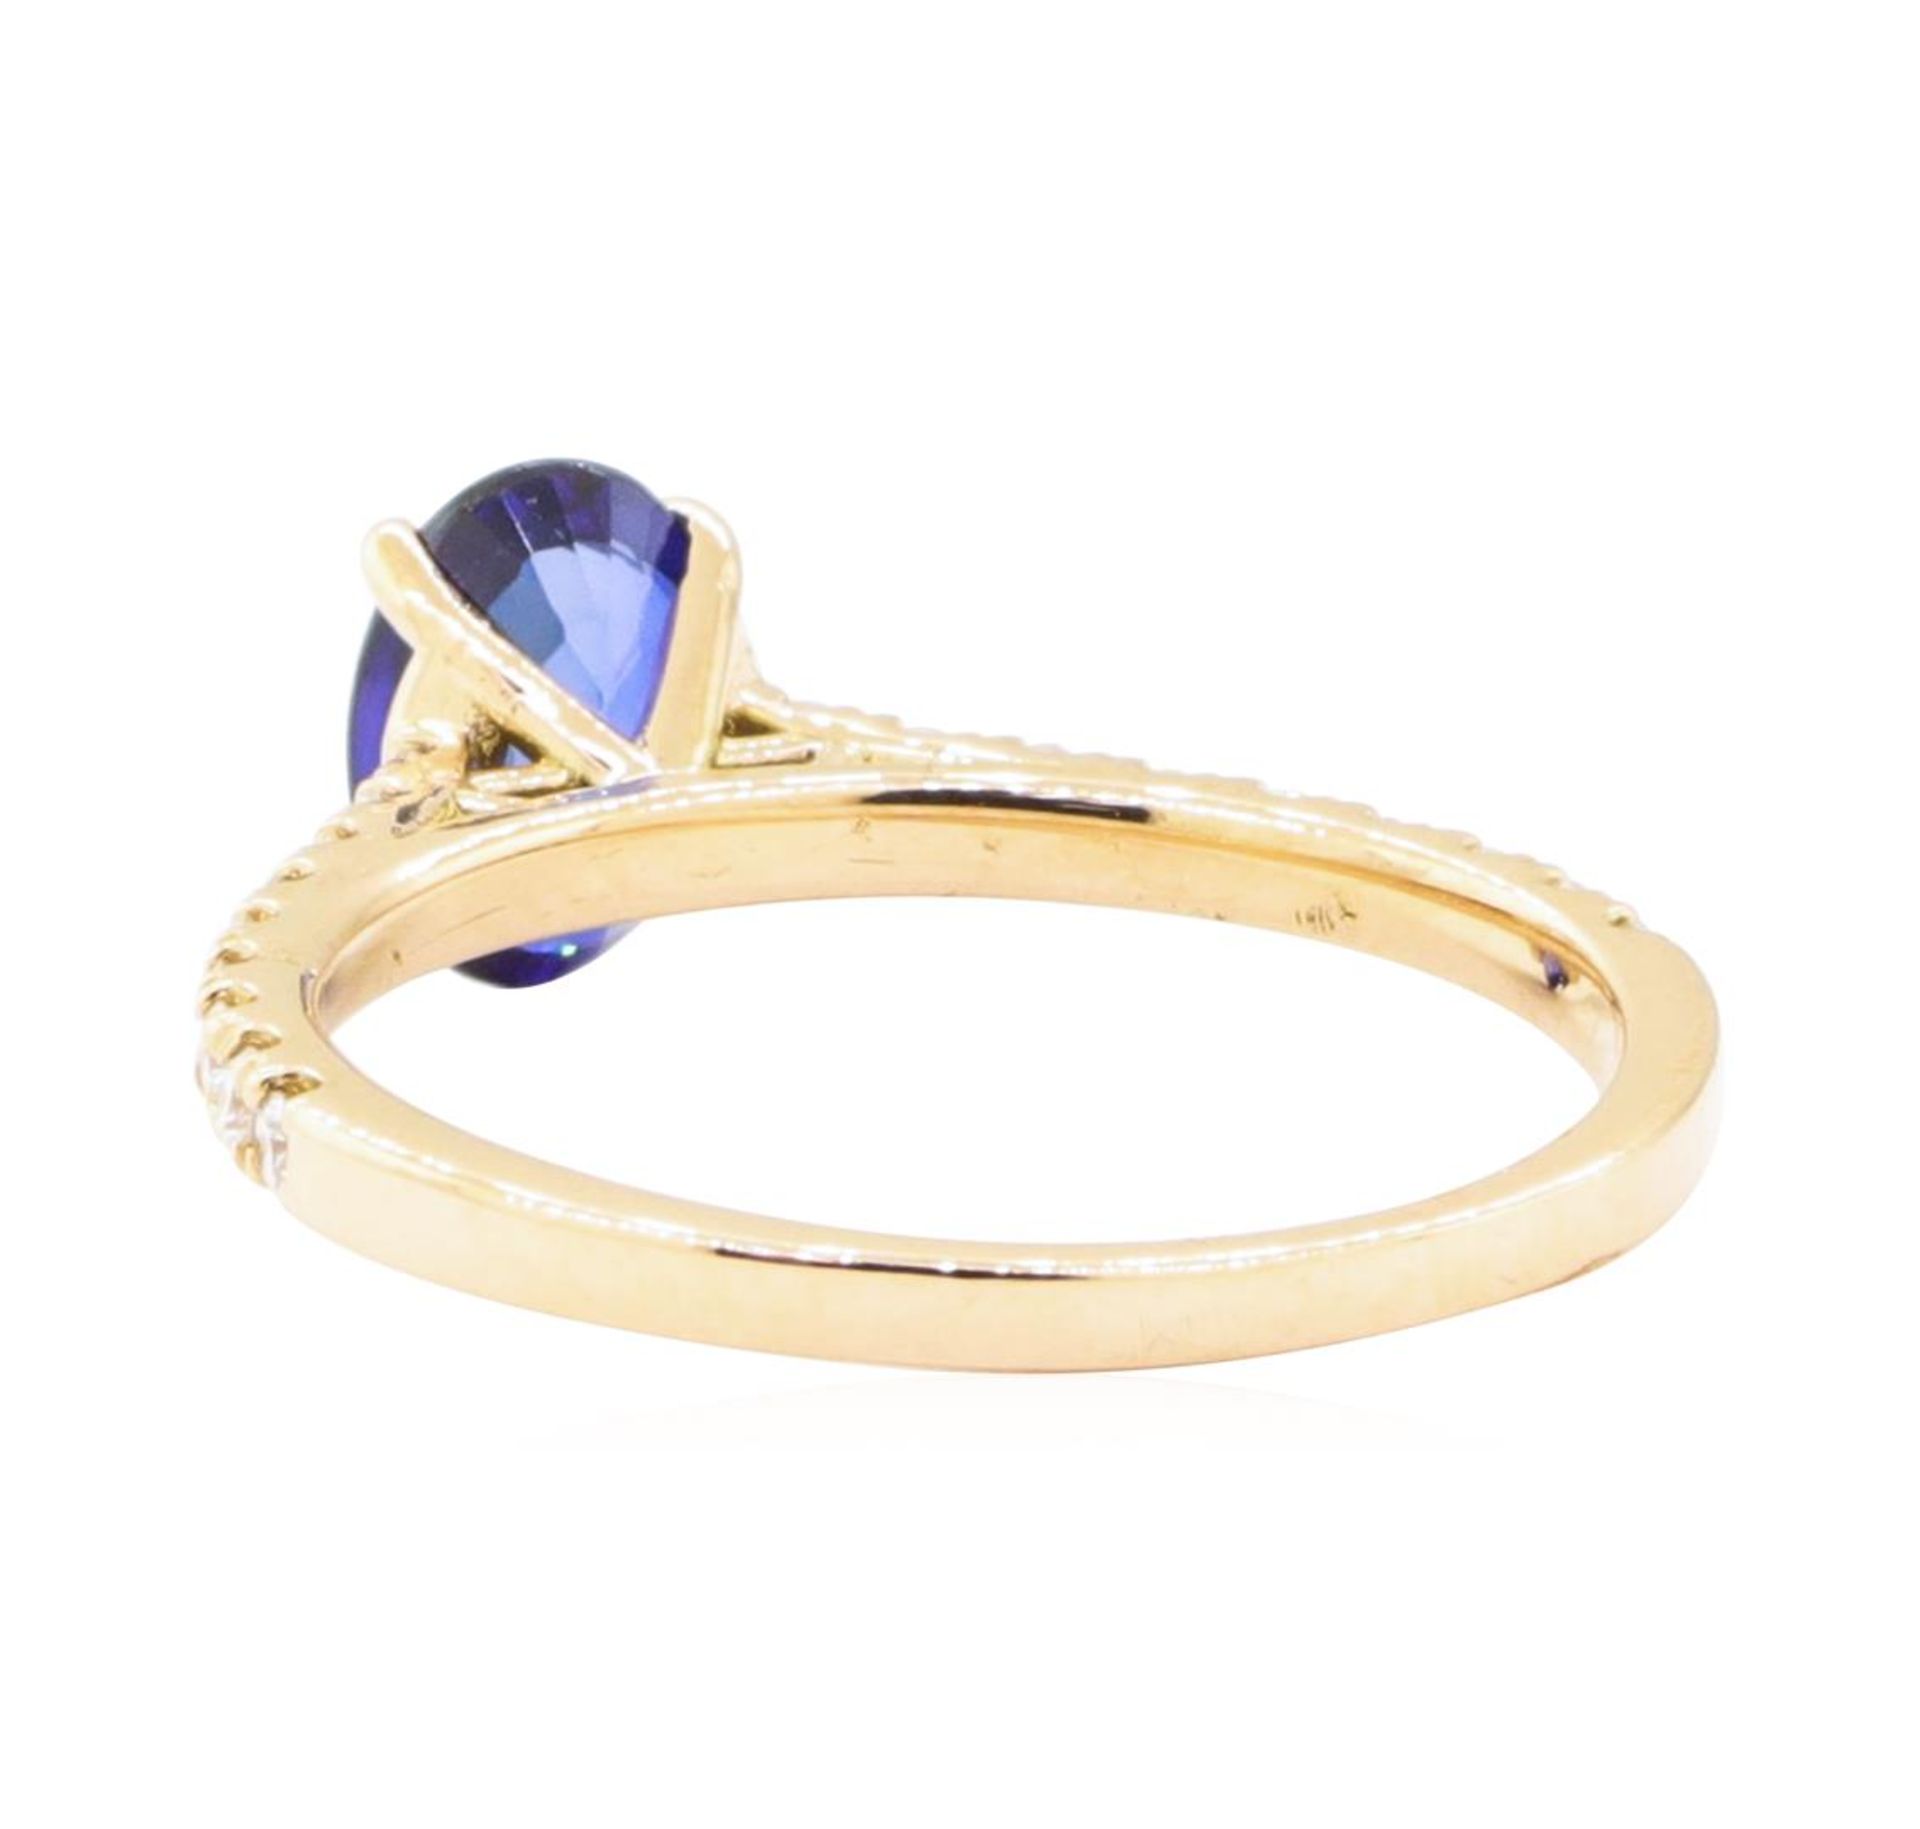 1.24ctw Sapphire and Diamond Ring - 14KT Rose Gold - Image 3 of 4